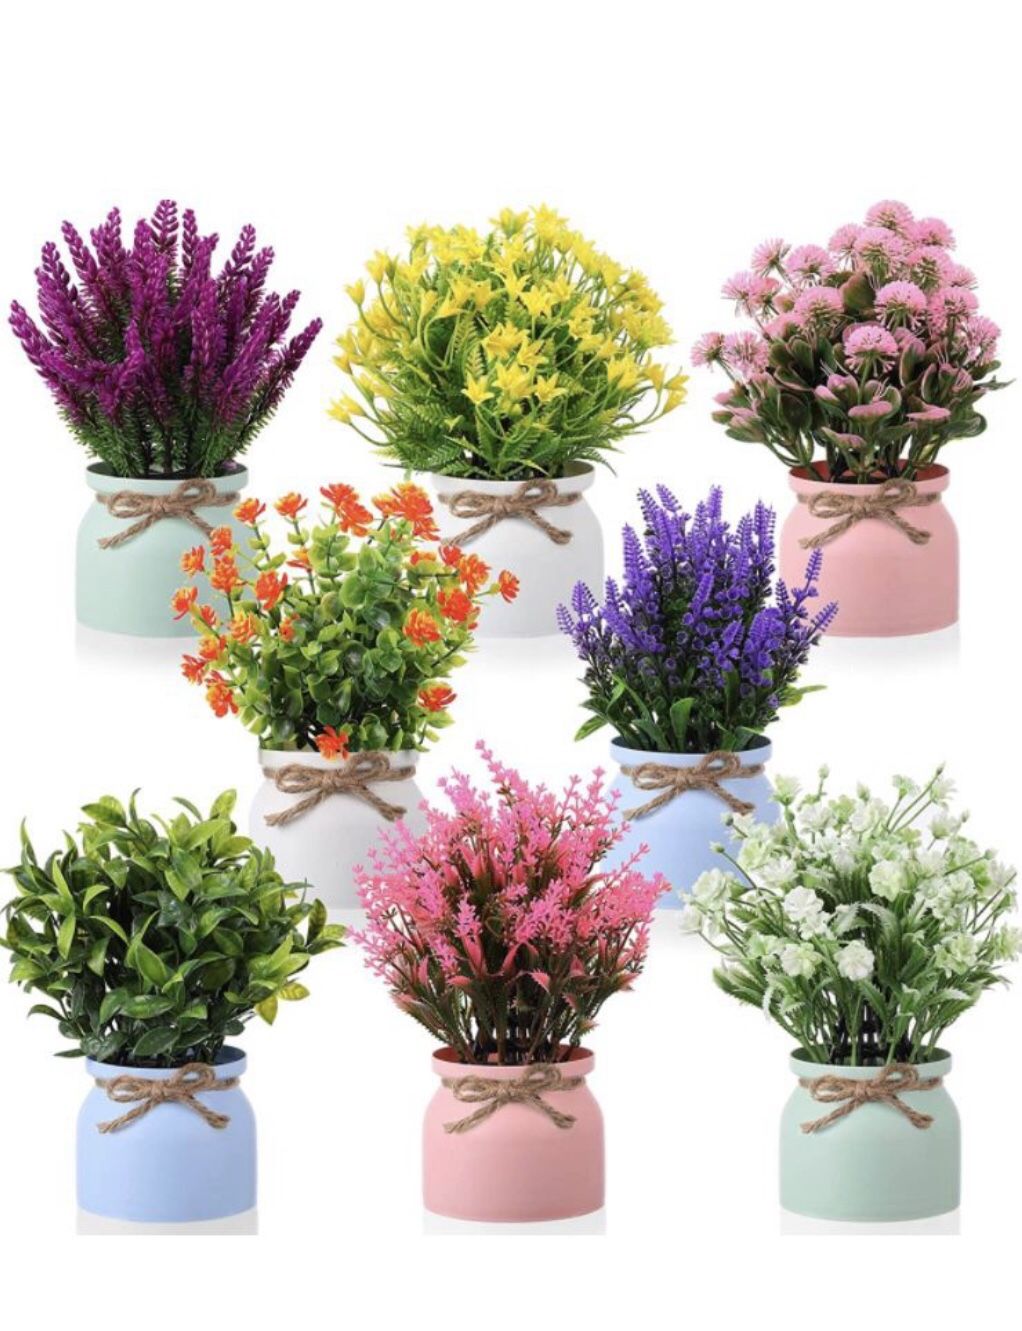 Artificial Potted Flowers Fake Plants Plastic For Home Decor Indoor (NEW)